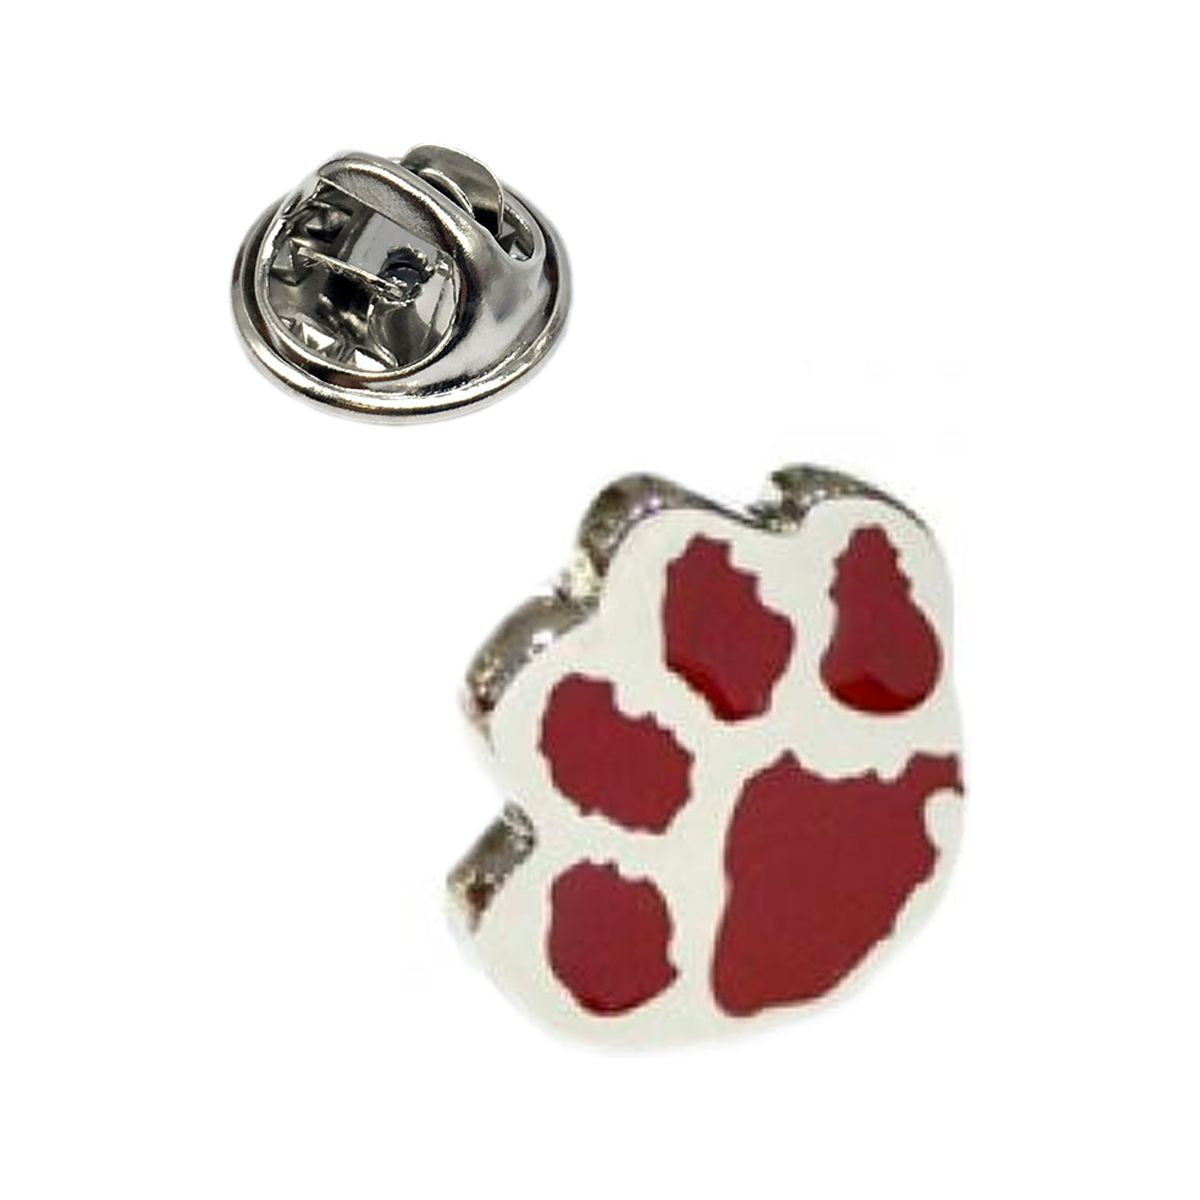 Red Dogs Paw Design Lapel Pin Badge - Ashton and Finch